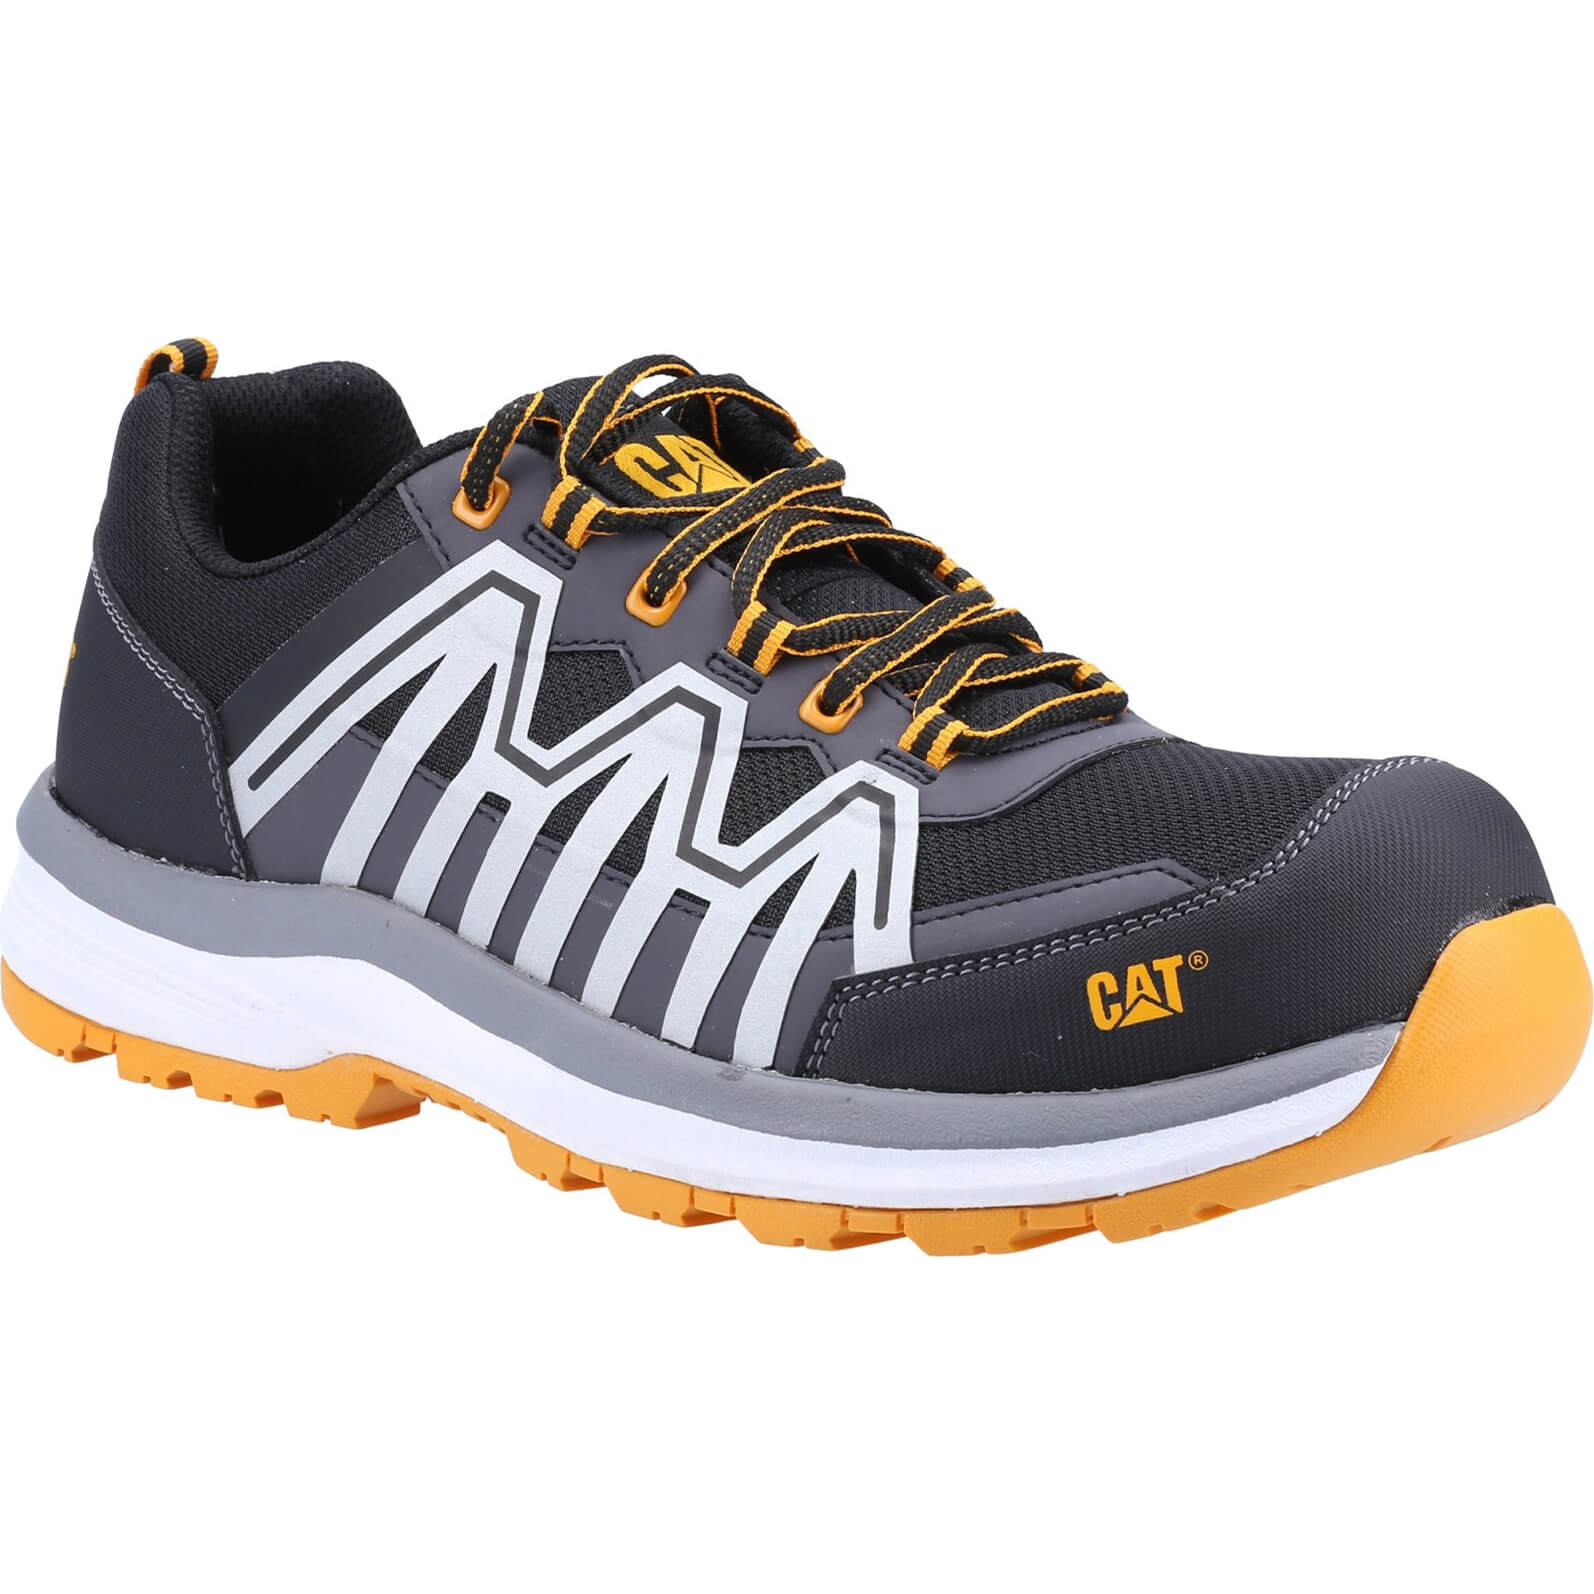 Image of Caterpillar Mens Charge S3 Safety Trainer Orange Size 12